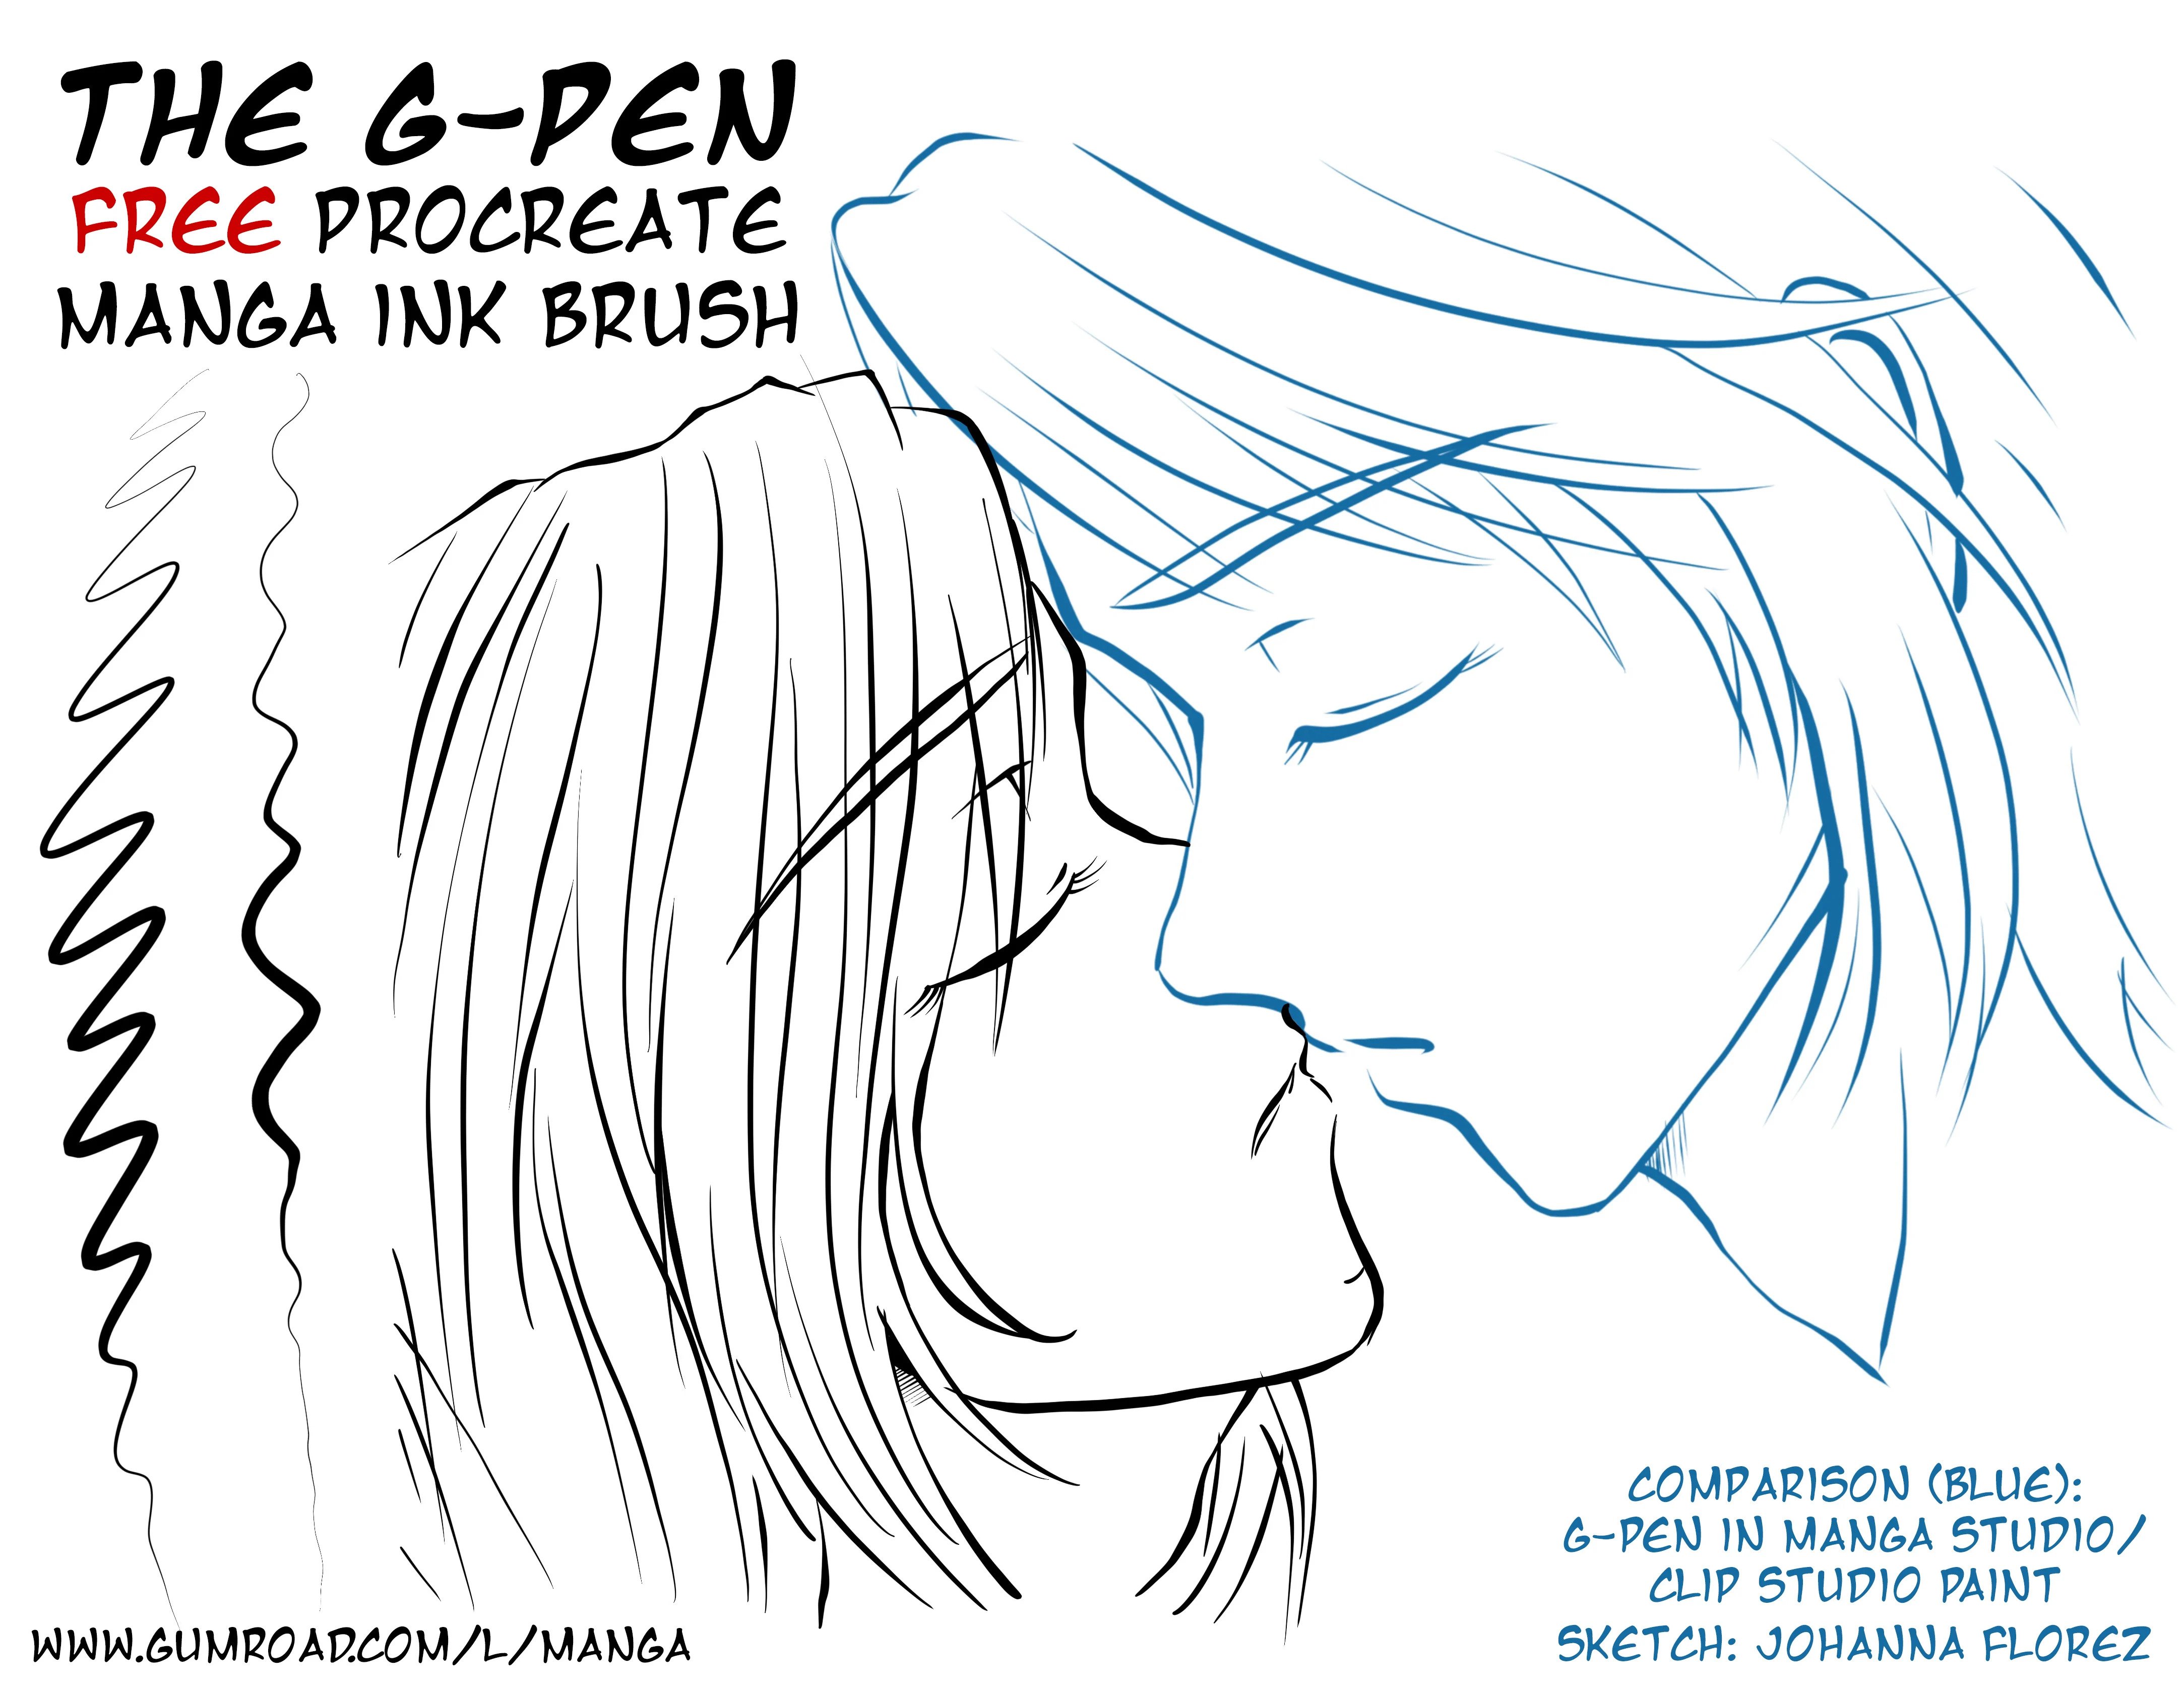 Free Manga Ink Brush G-pen for Procreate by GeorgBrush | Pencil & Ink